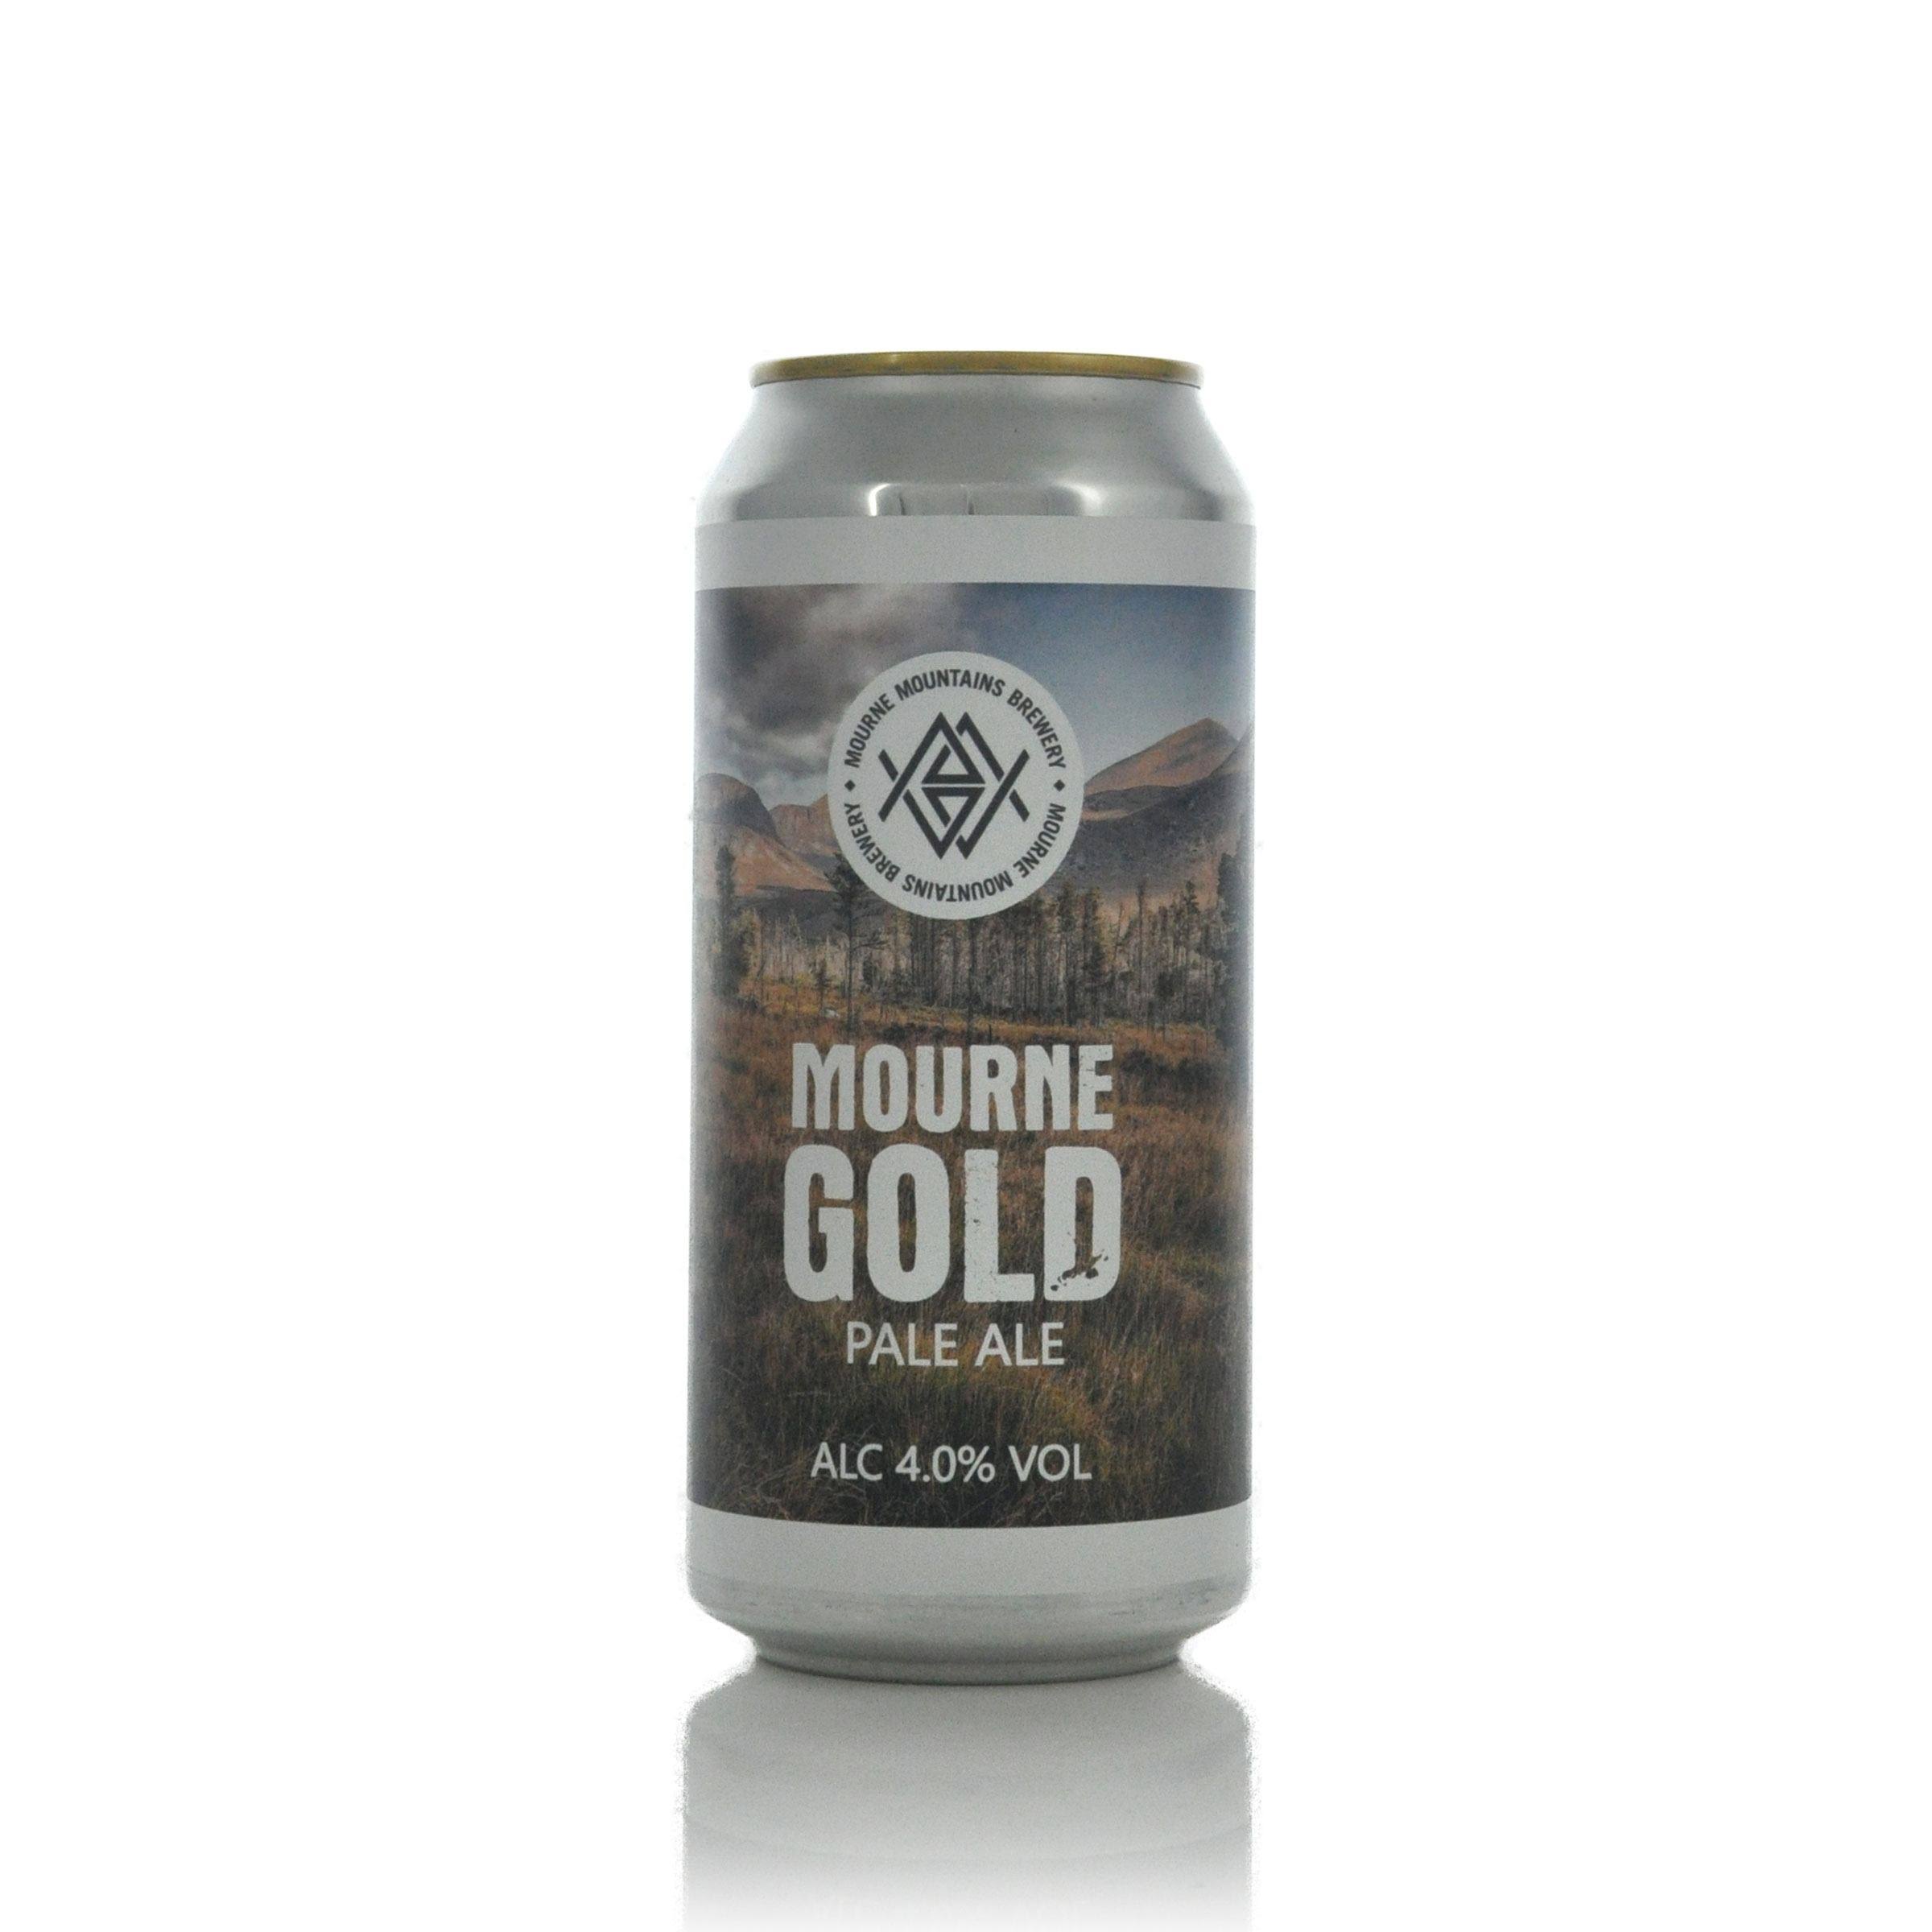 Mourne Mountains Brewery - Mourne Gold Pale Ale 4.0% ABV